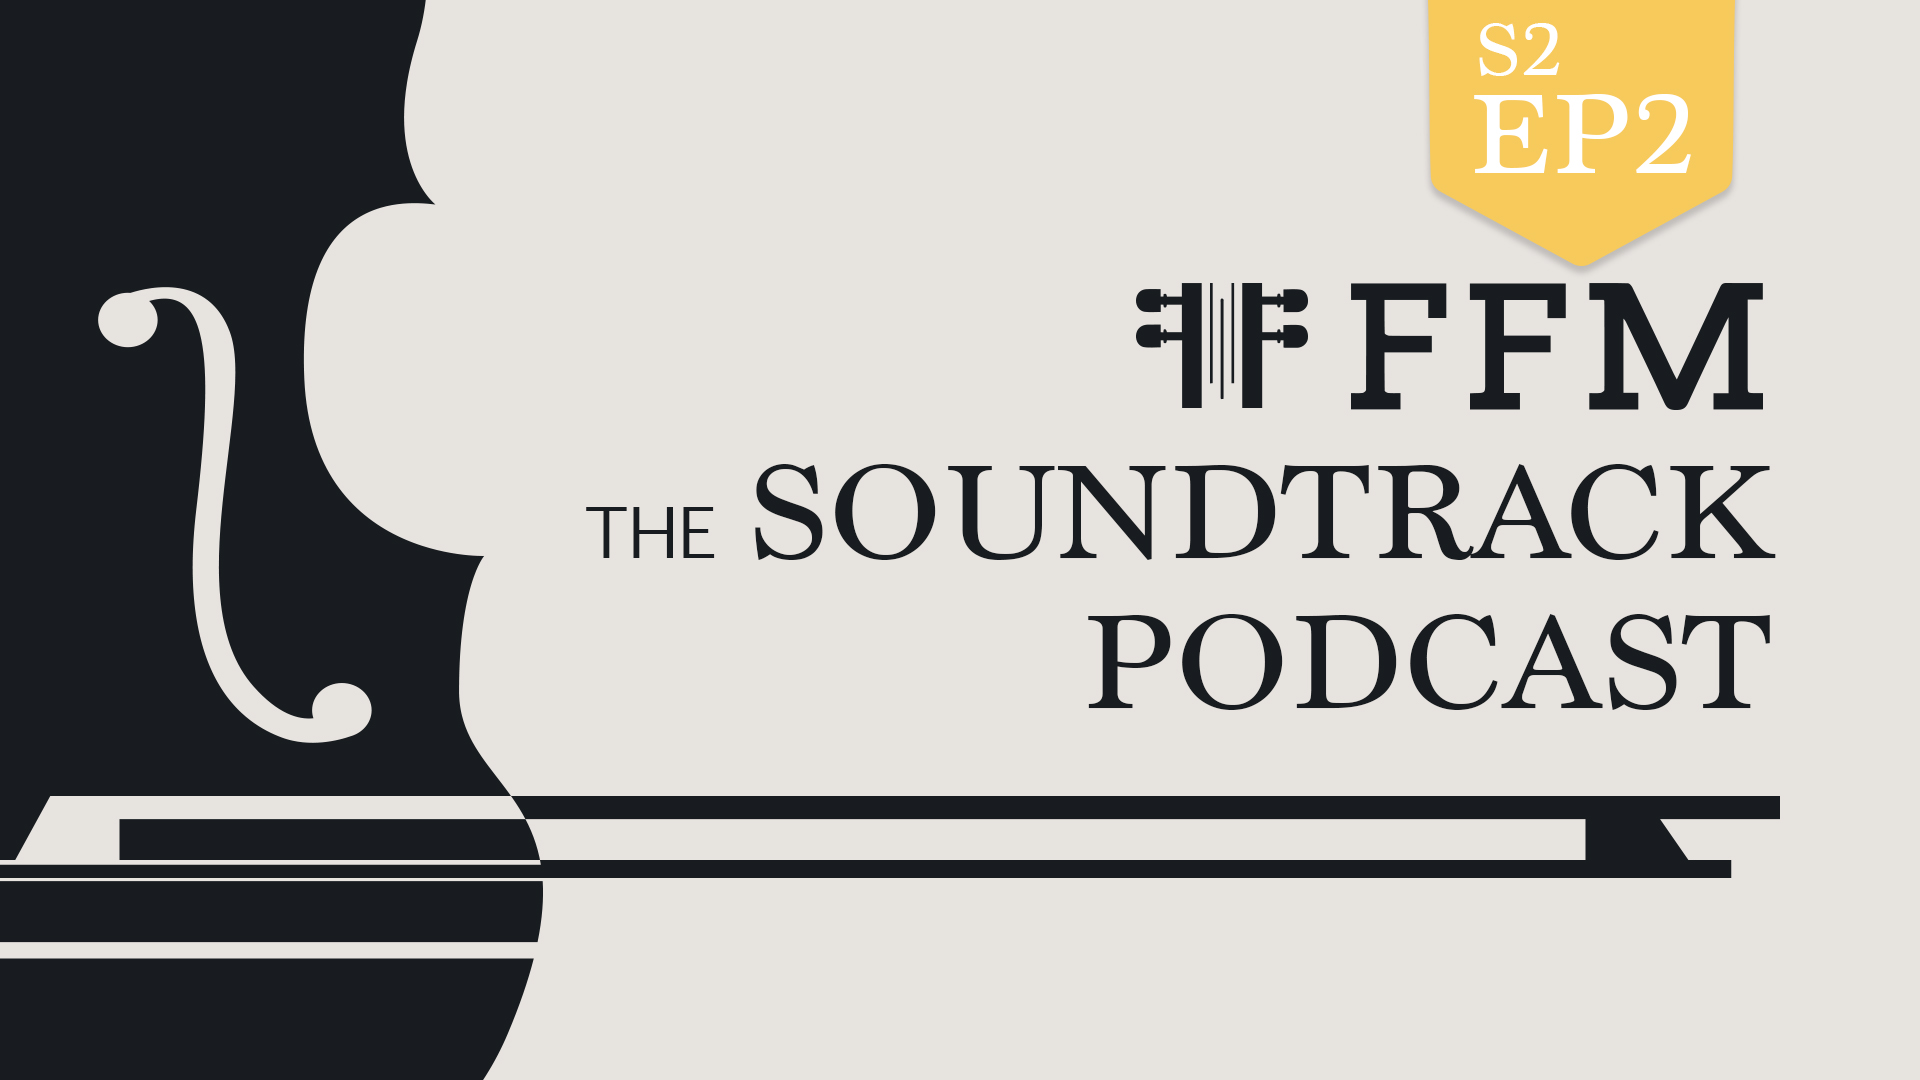 FFM THE SOUNDTRACK PODCAST -S2, EP2 WITH STEPHAN LEMBKE